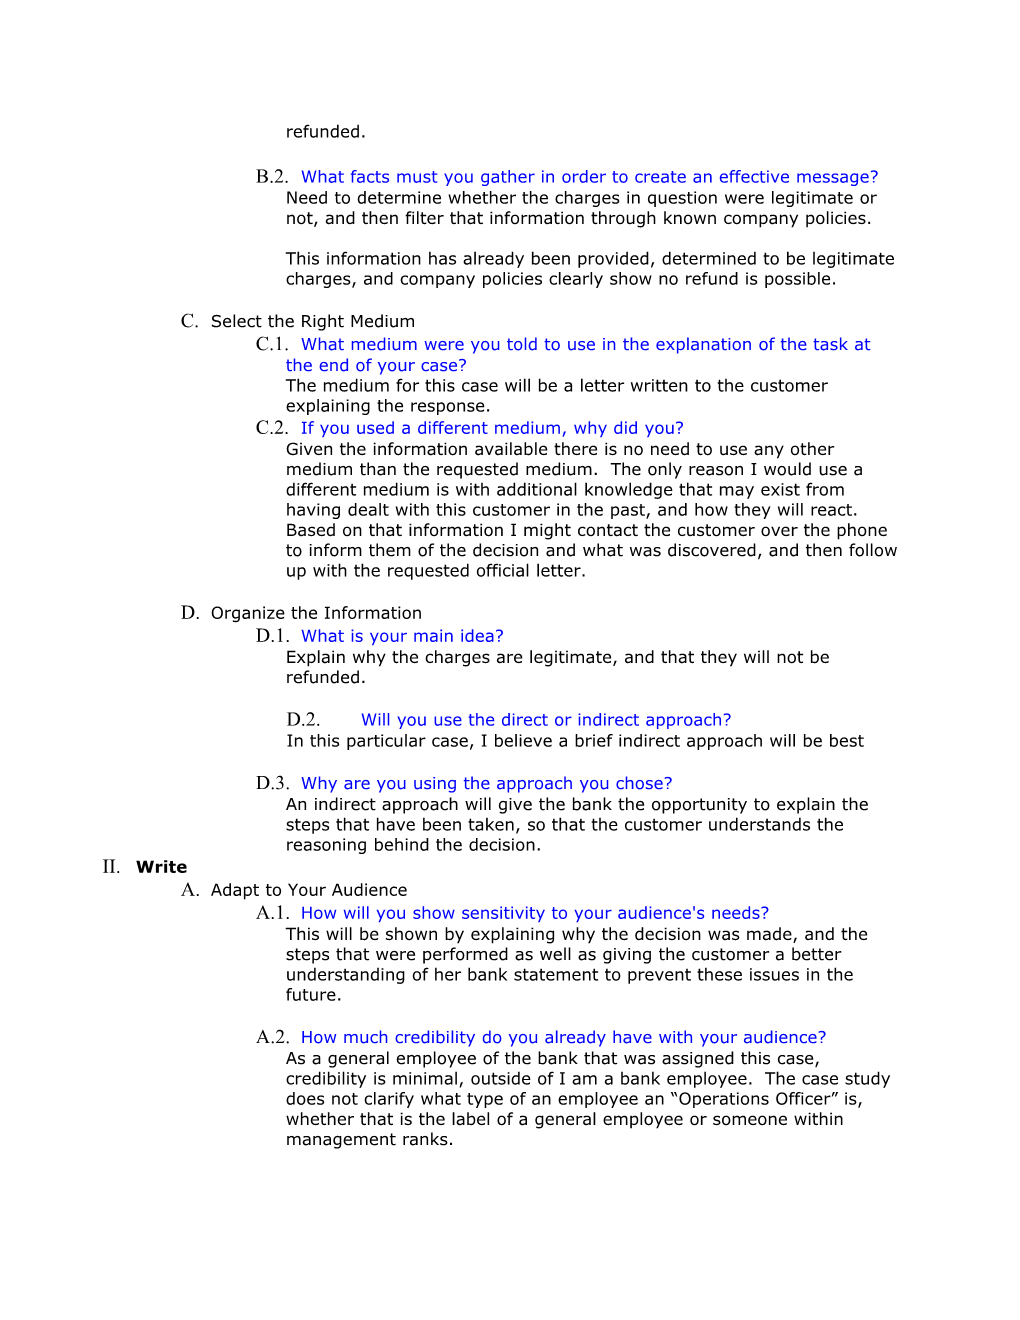 Casequestions Week 4 Assignments